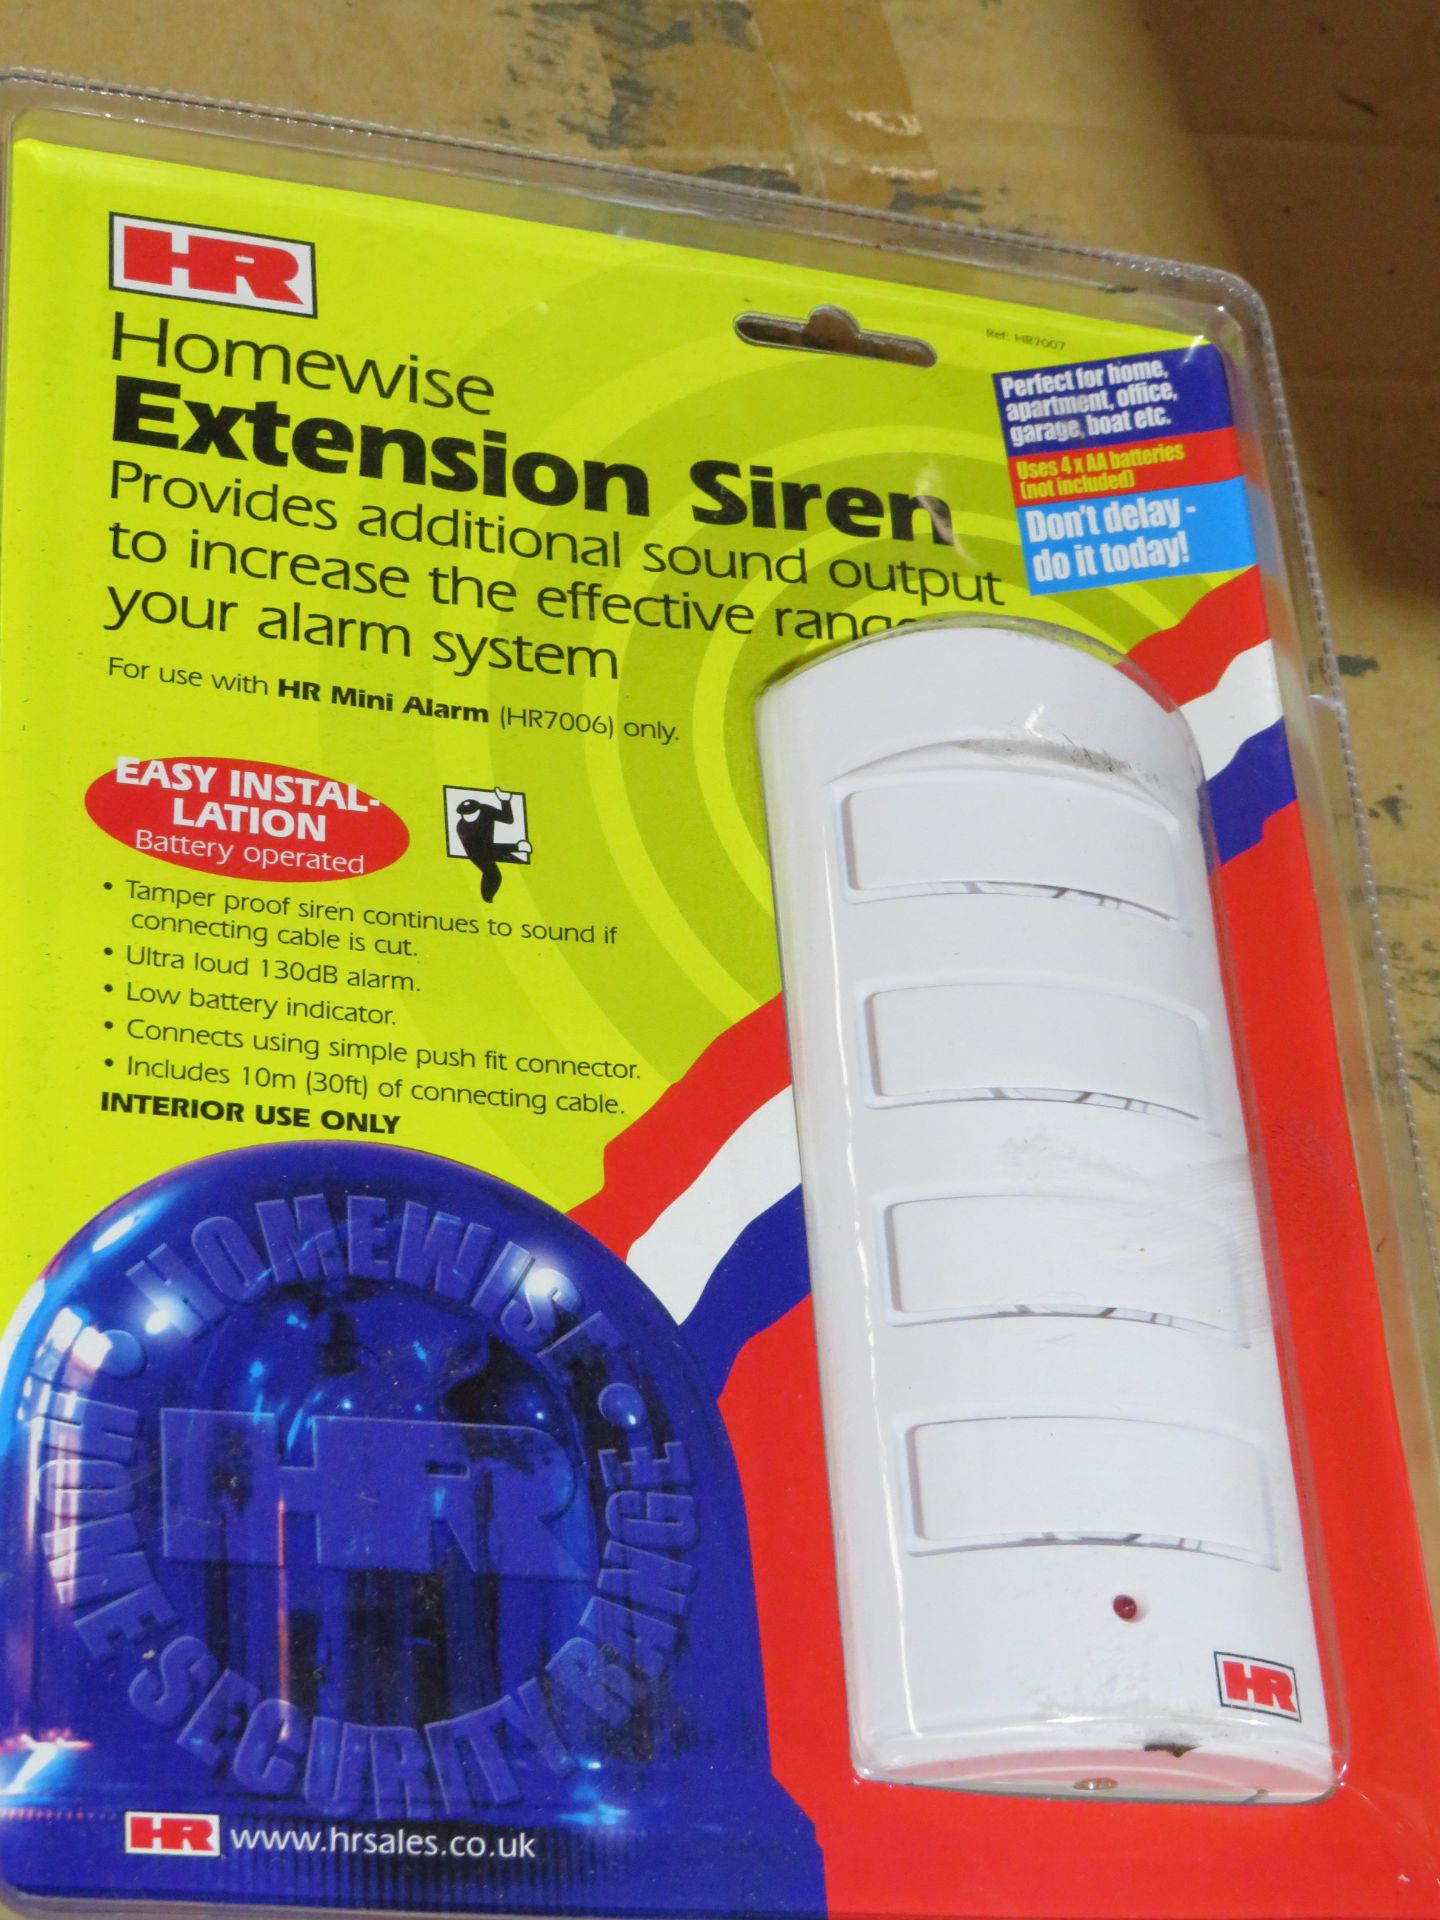 Box of 24x Home wise Extension sirens, still sealed in packaging